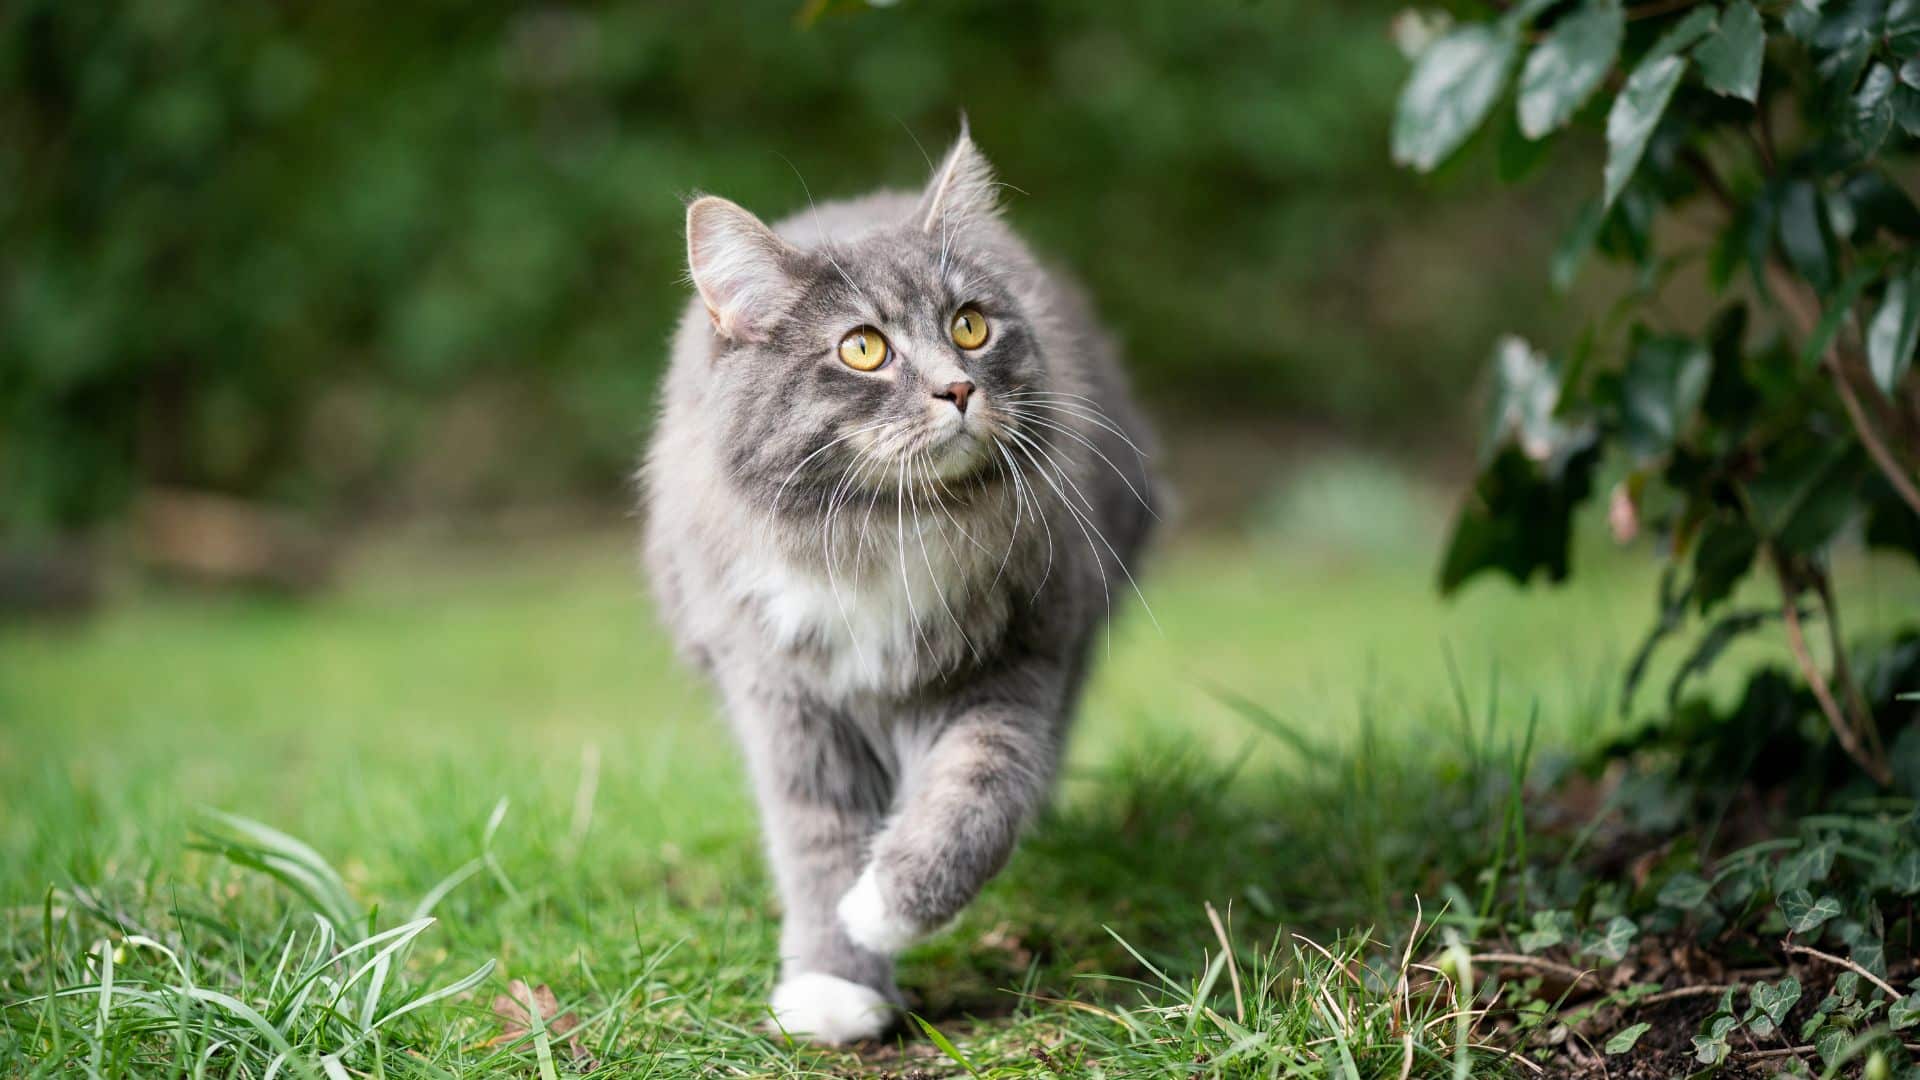 Healthy cat outdoors enjoying active lifestyle